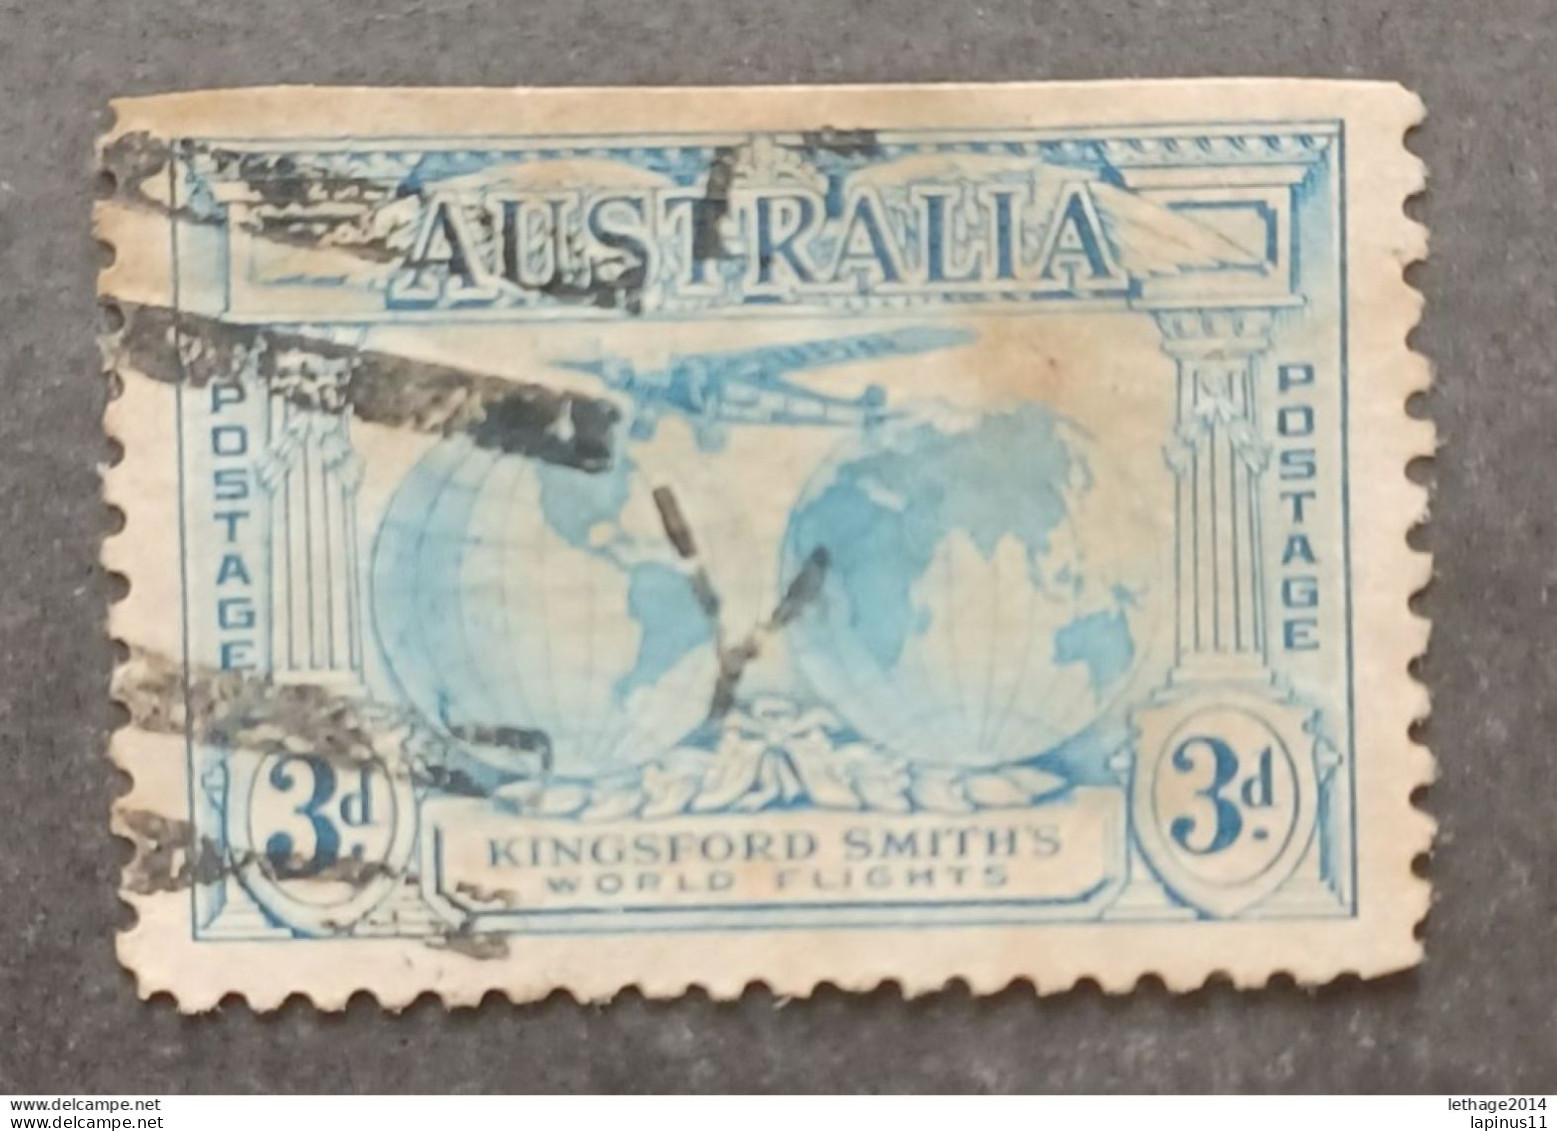 AUSTRALIA 1931 SOUTHERN CROSS OVER OF THE EMISPHERES SCOTT N 112 VARIETY SUPERIOR IMPERFORATE - Gebraucht